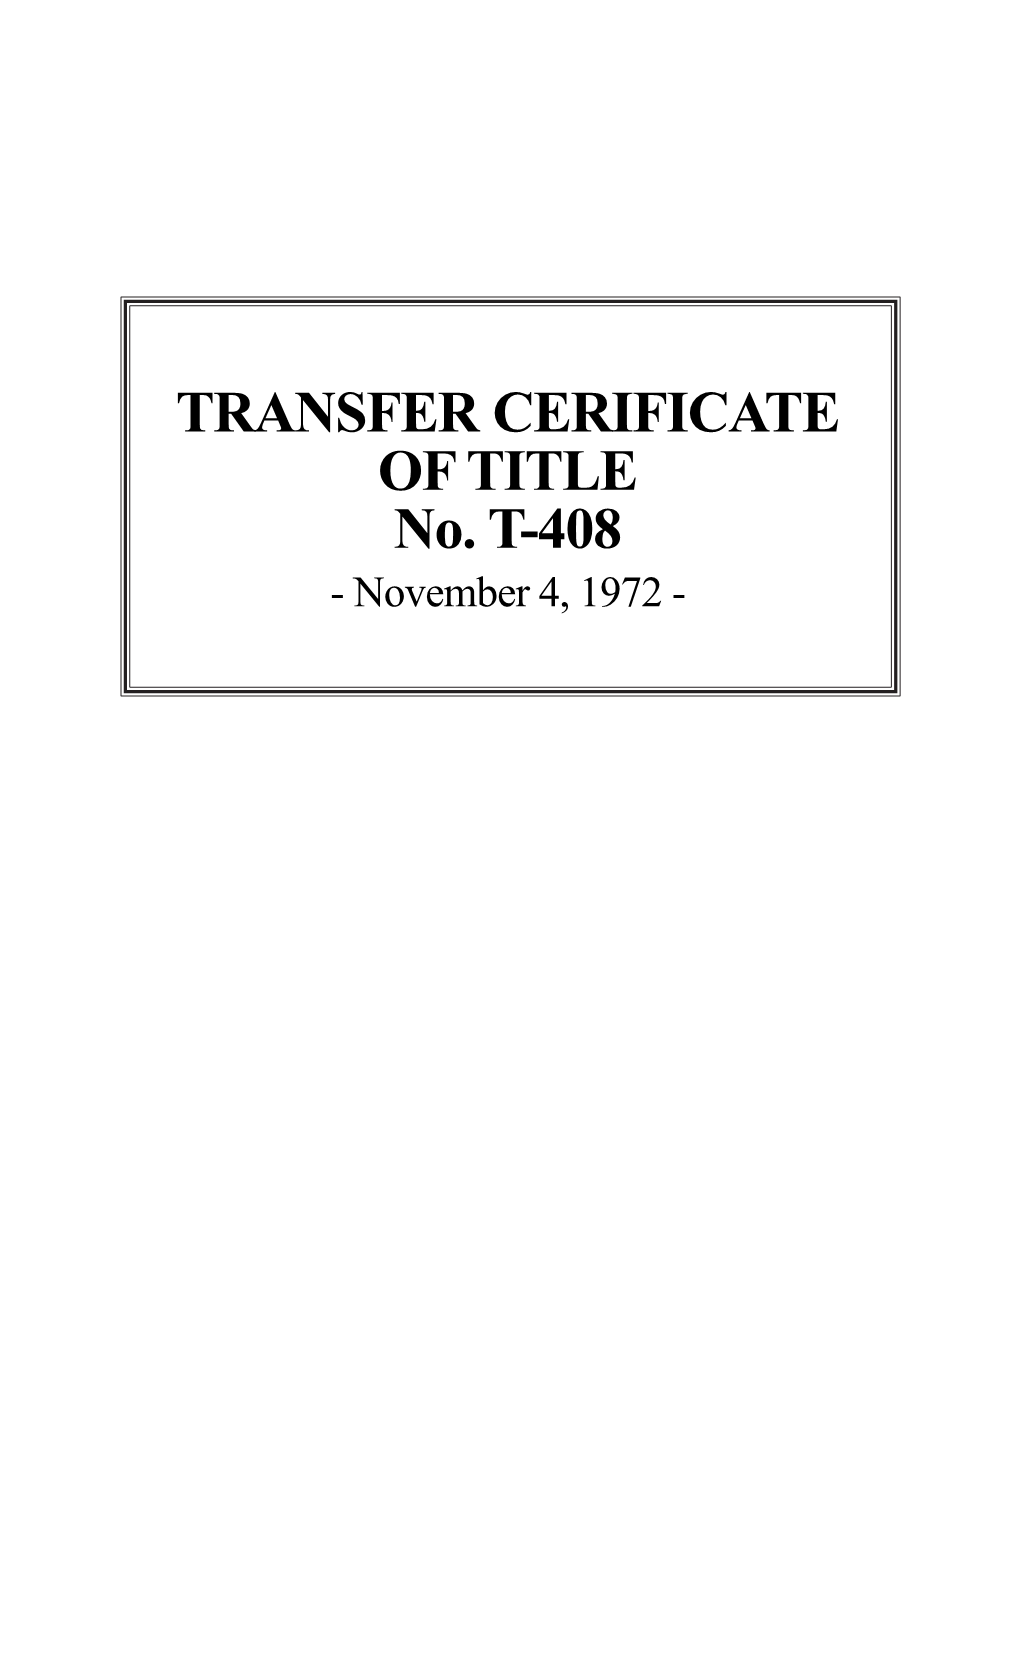 Transfer Certificate of Title No. T-408